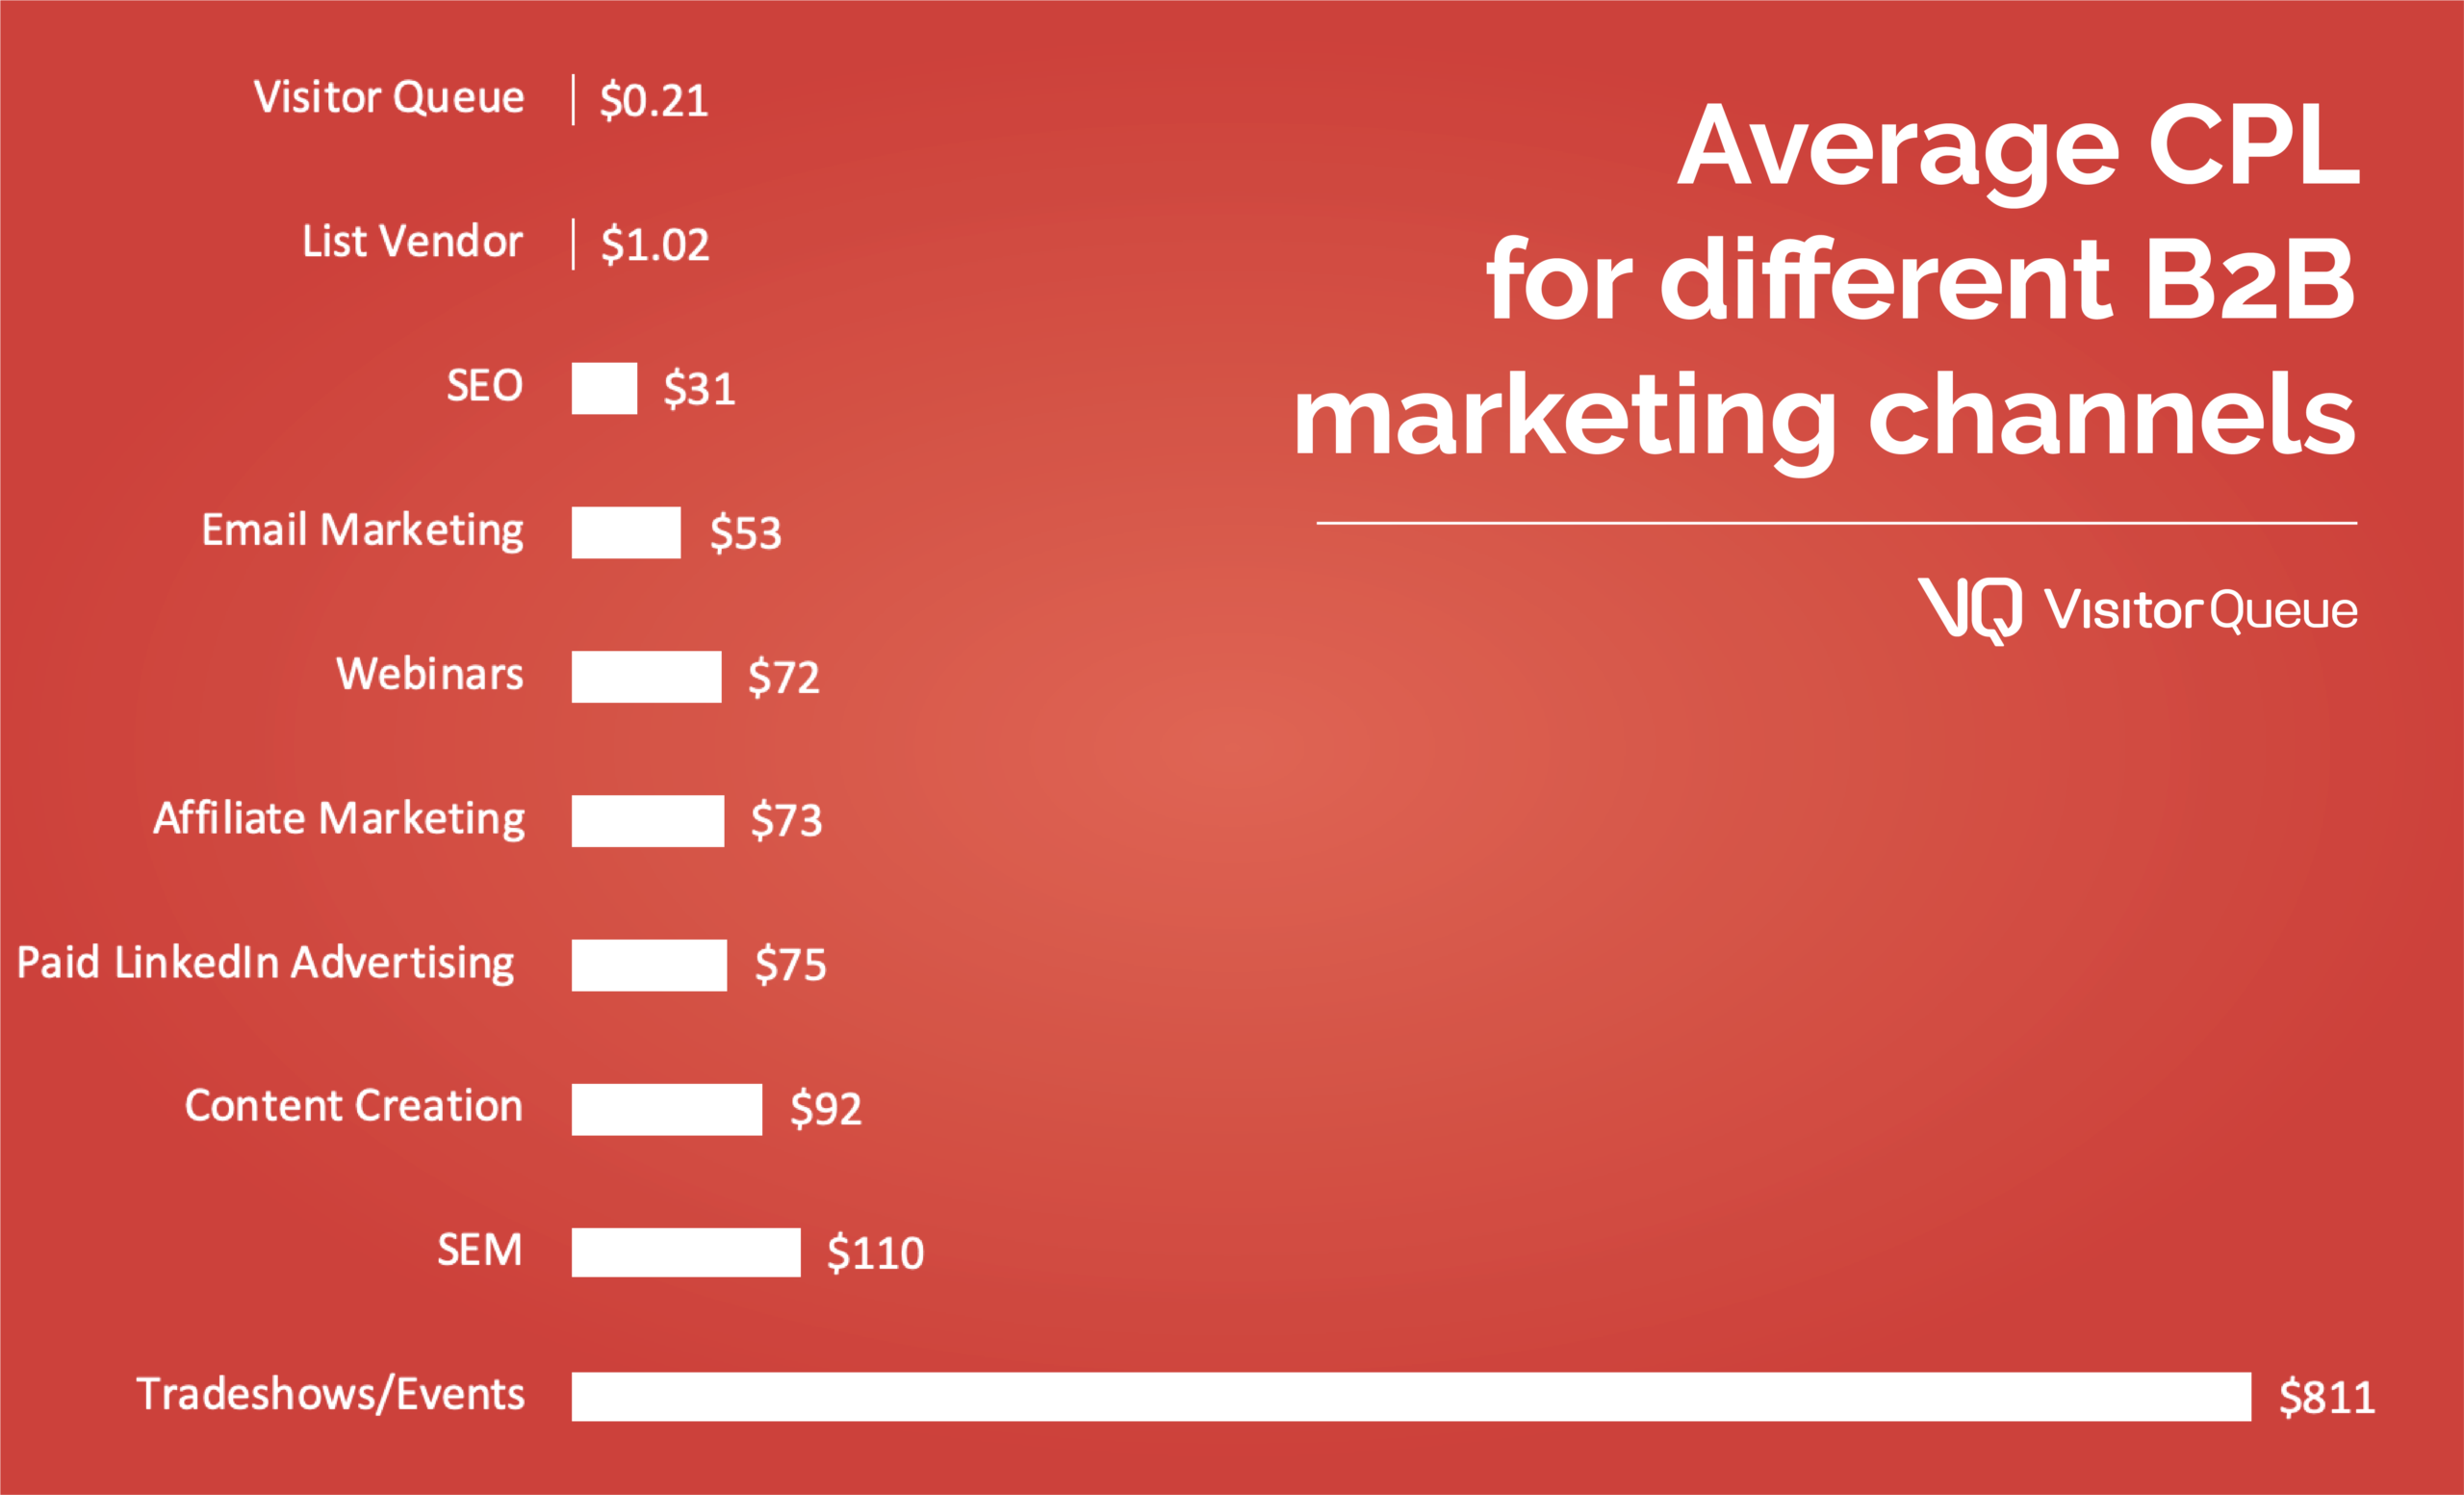 Average cost per lead (CPL) for different B2B marketing channels in 2021